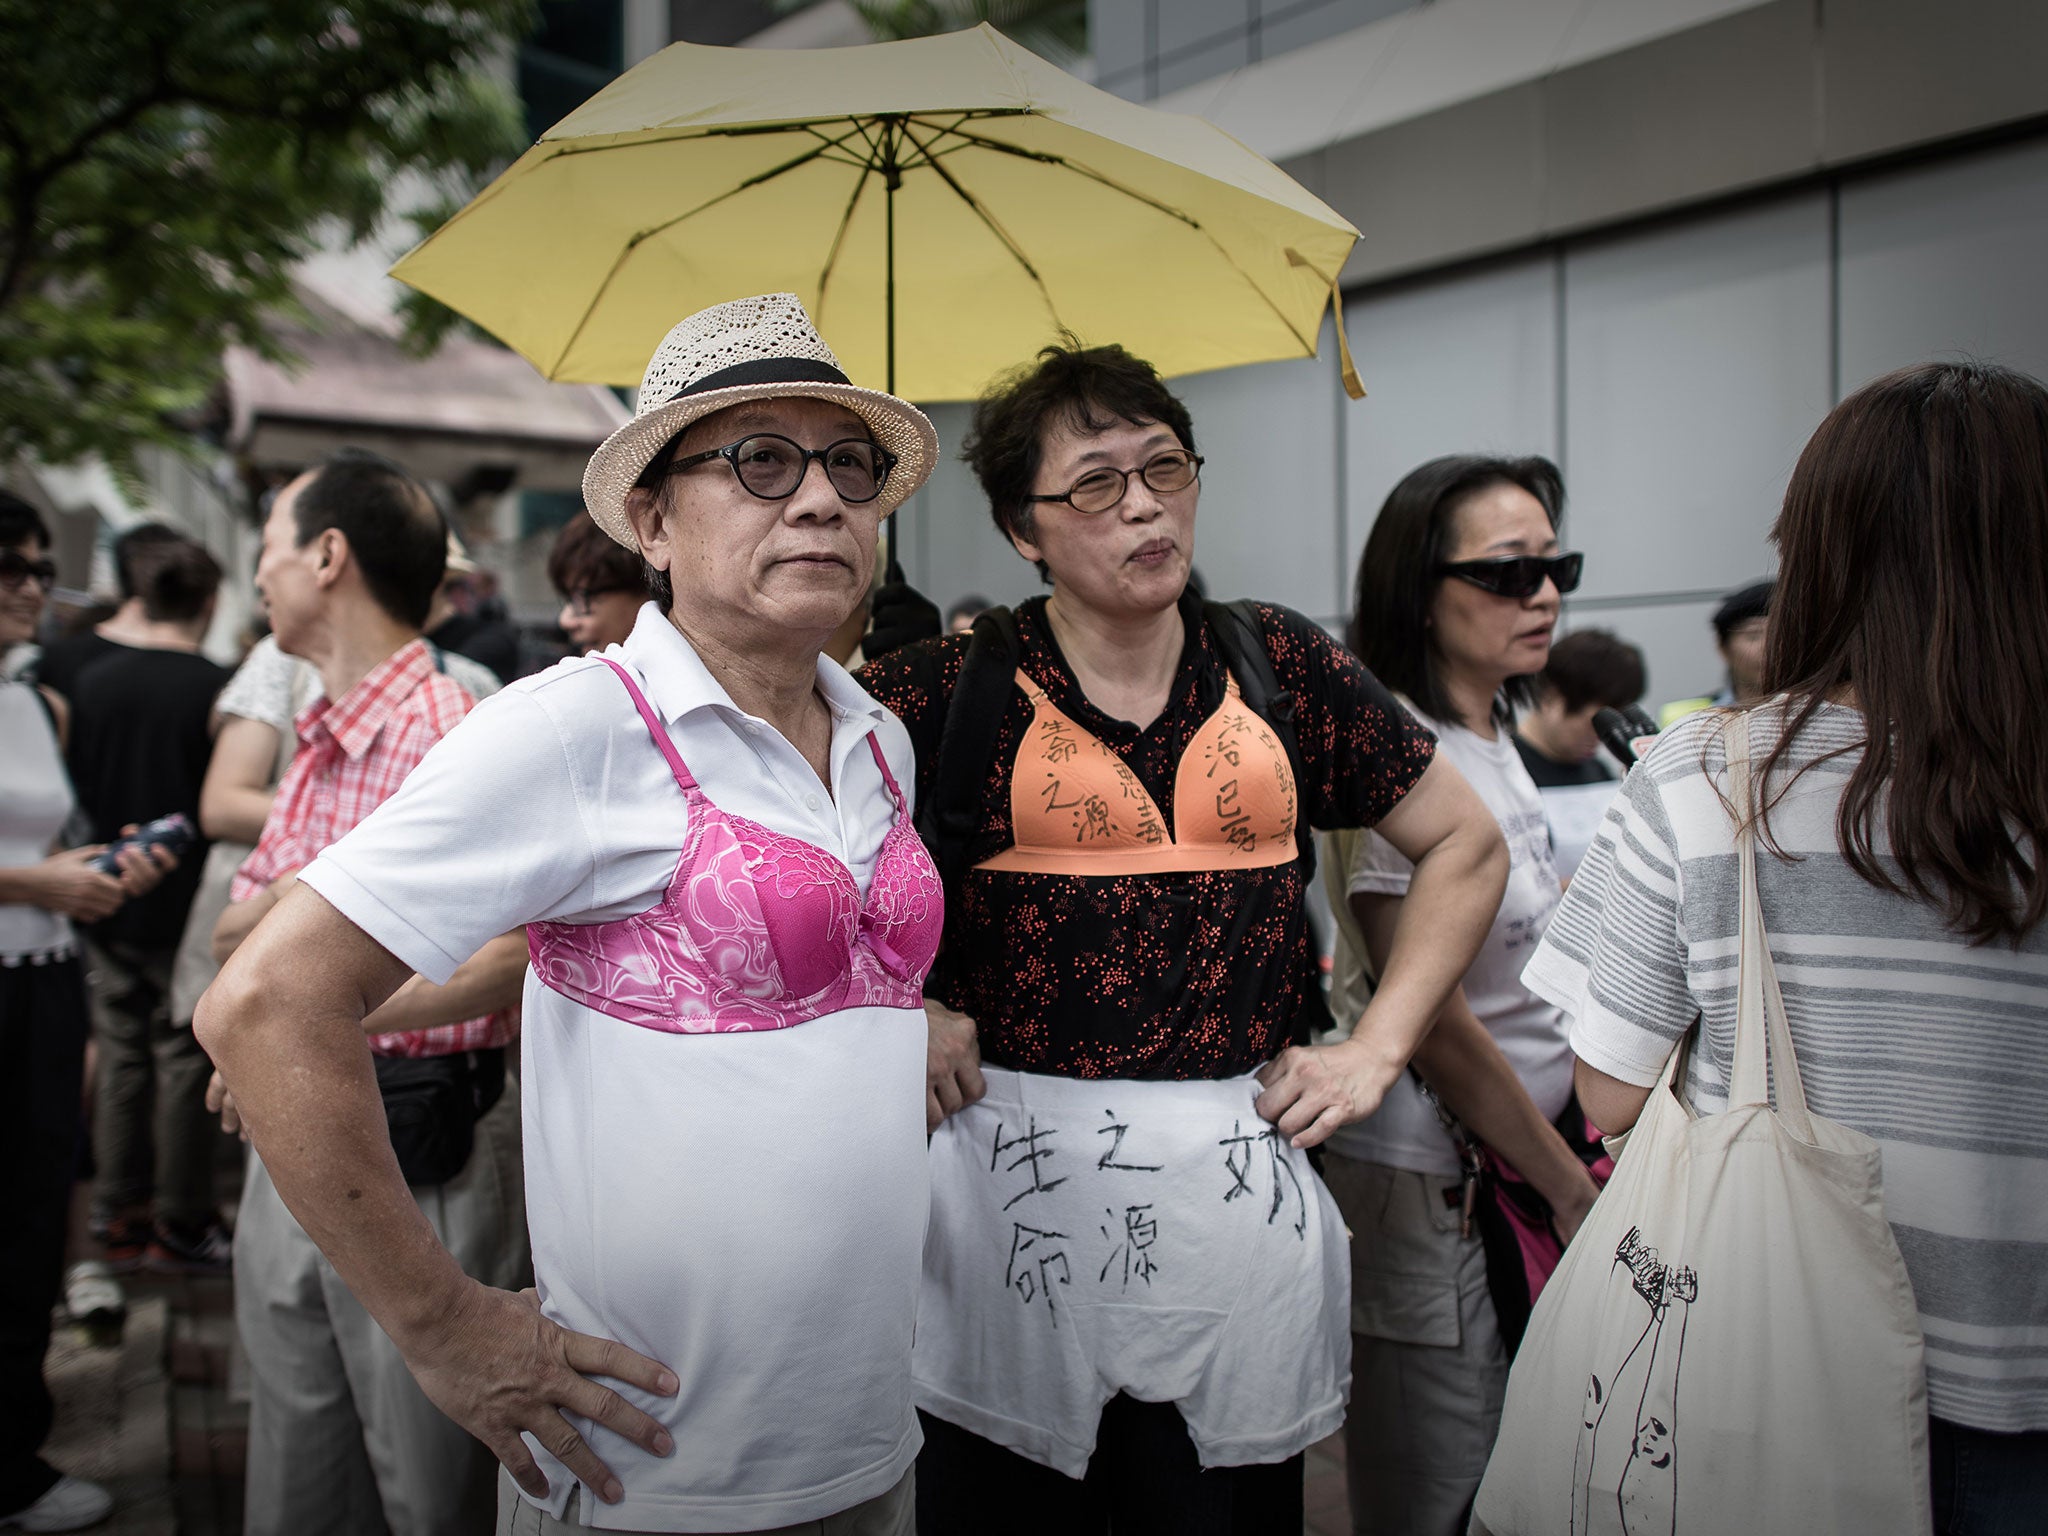 Men and women in Hong Kong have worn bras to protest the judge's decision